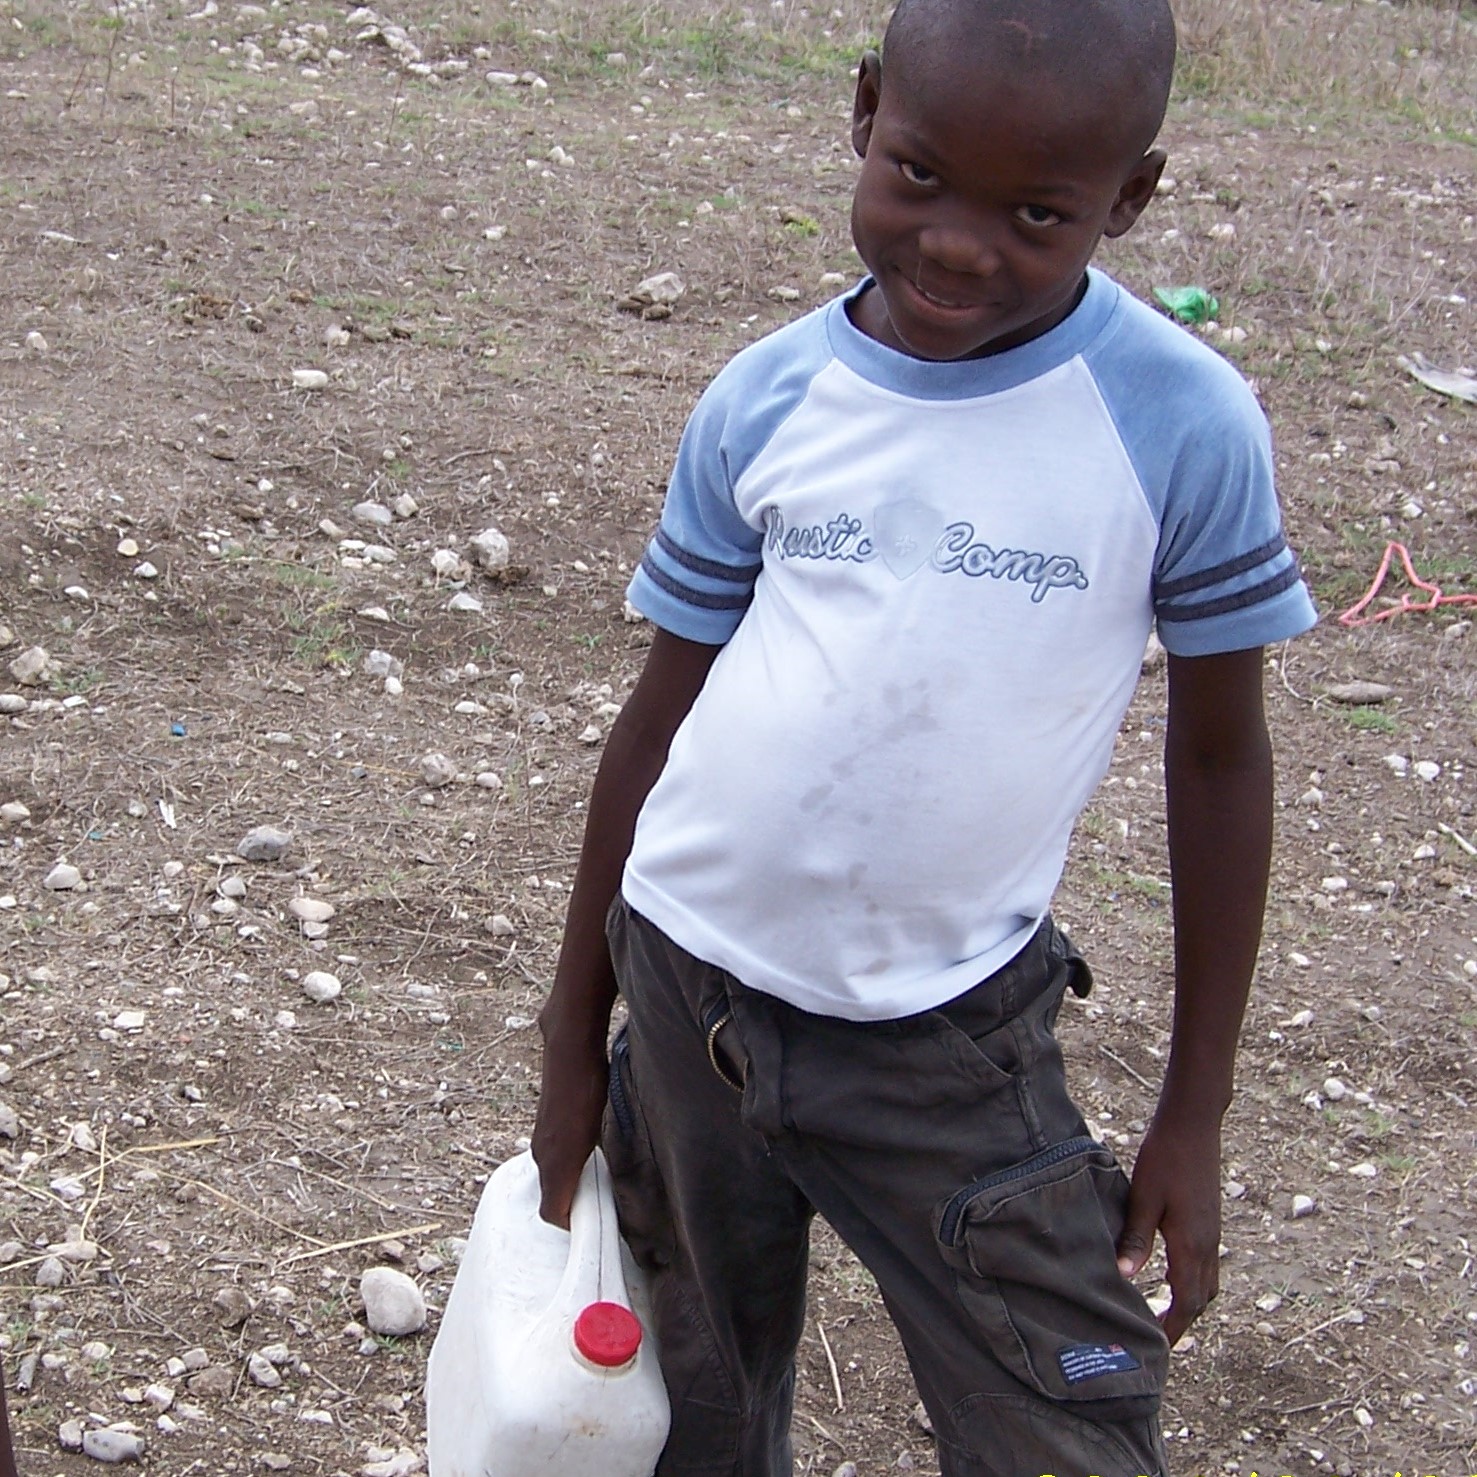 Young child going for water.